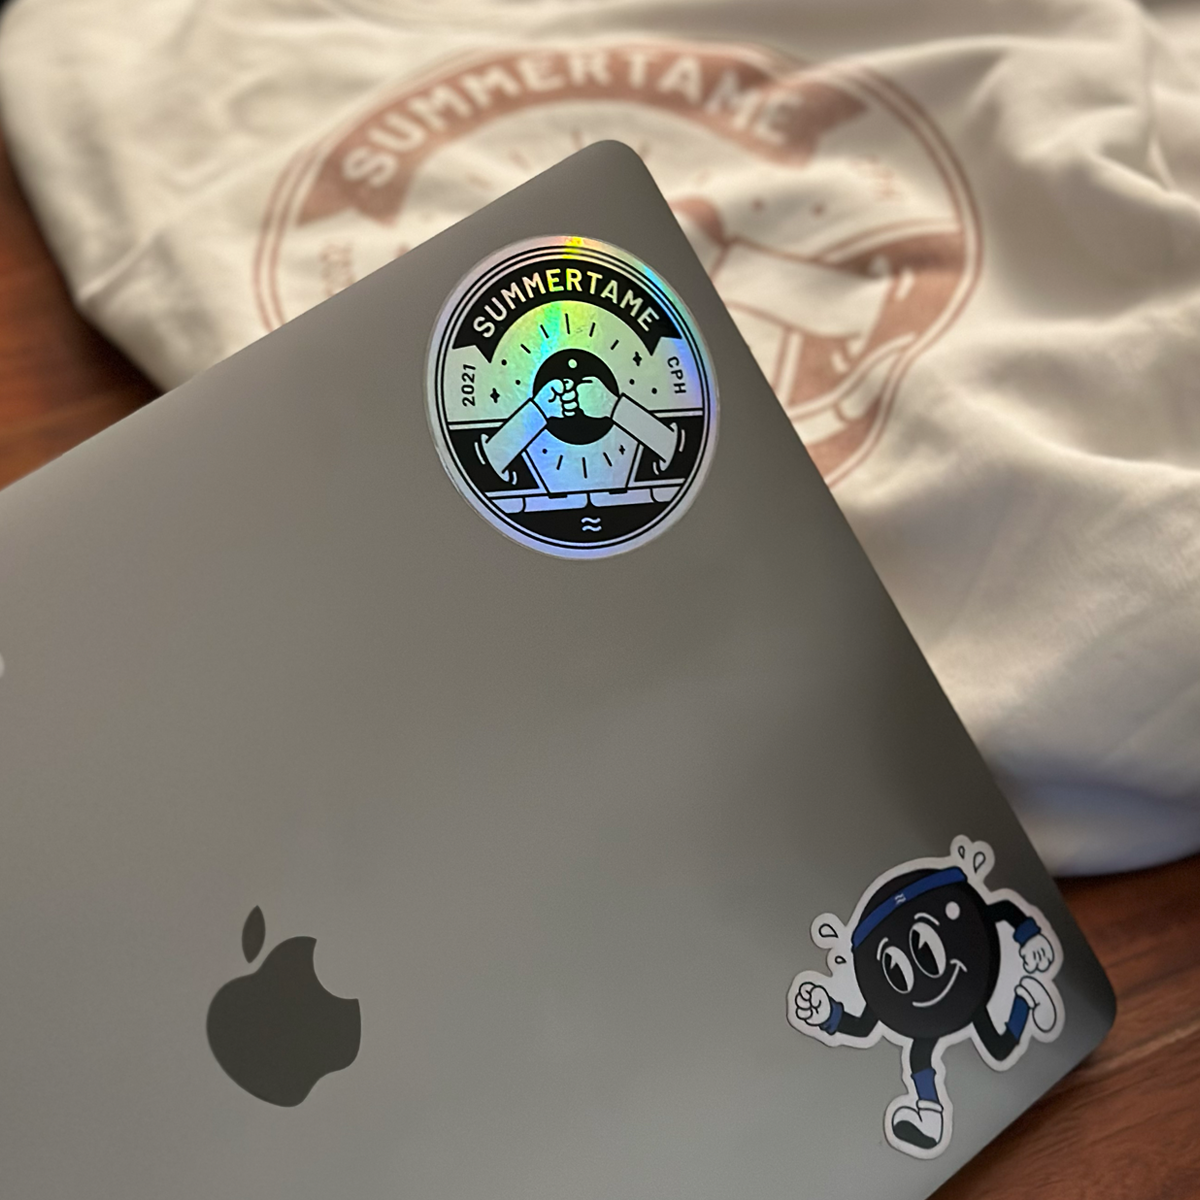 Image of a laptop with some sticker I designed.